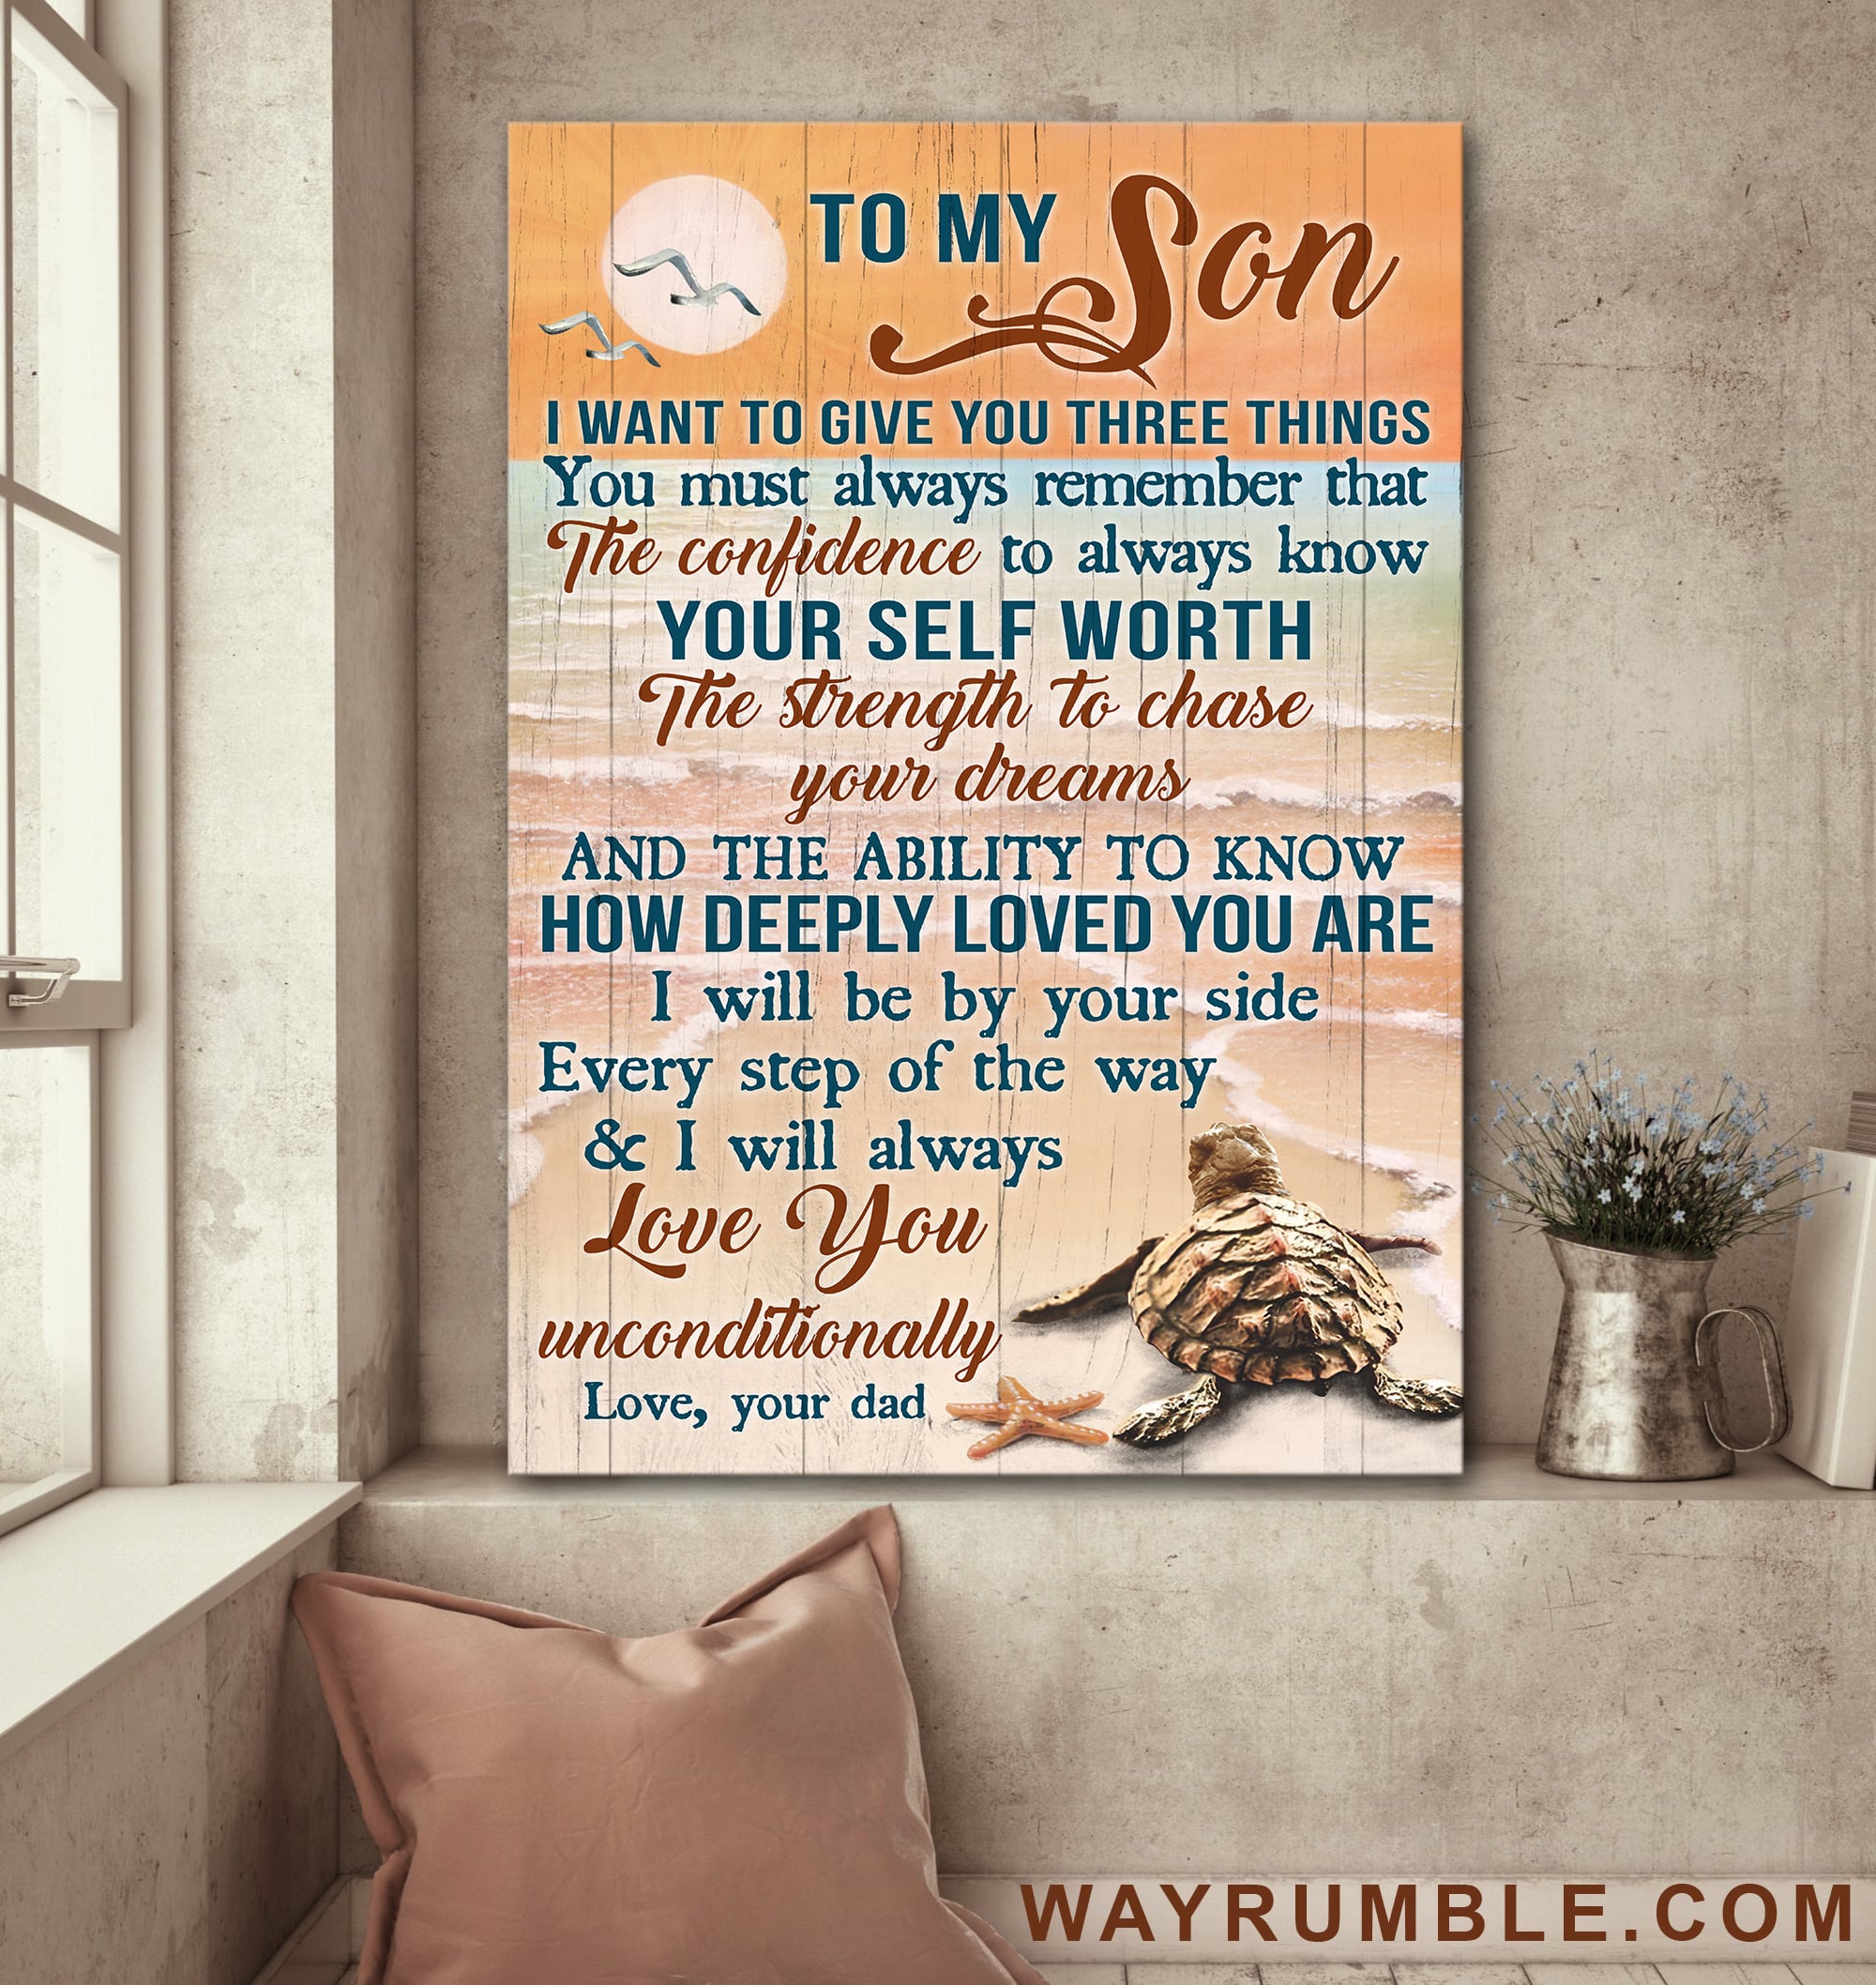 Dad to son, Turtle, Sunset Beach, I will always love you unconditionally - Family Portrait Canvas Prints, Wall Art